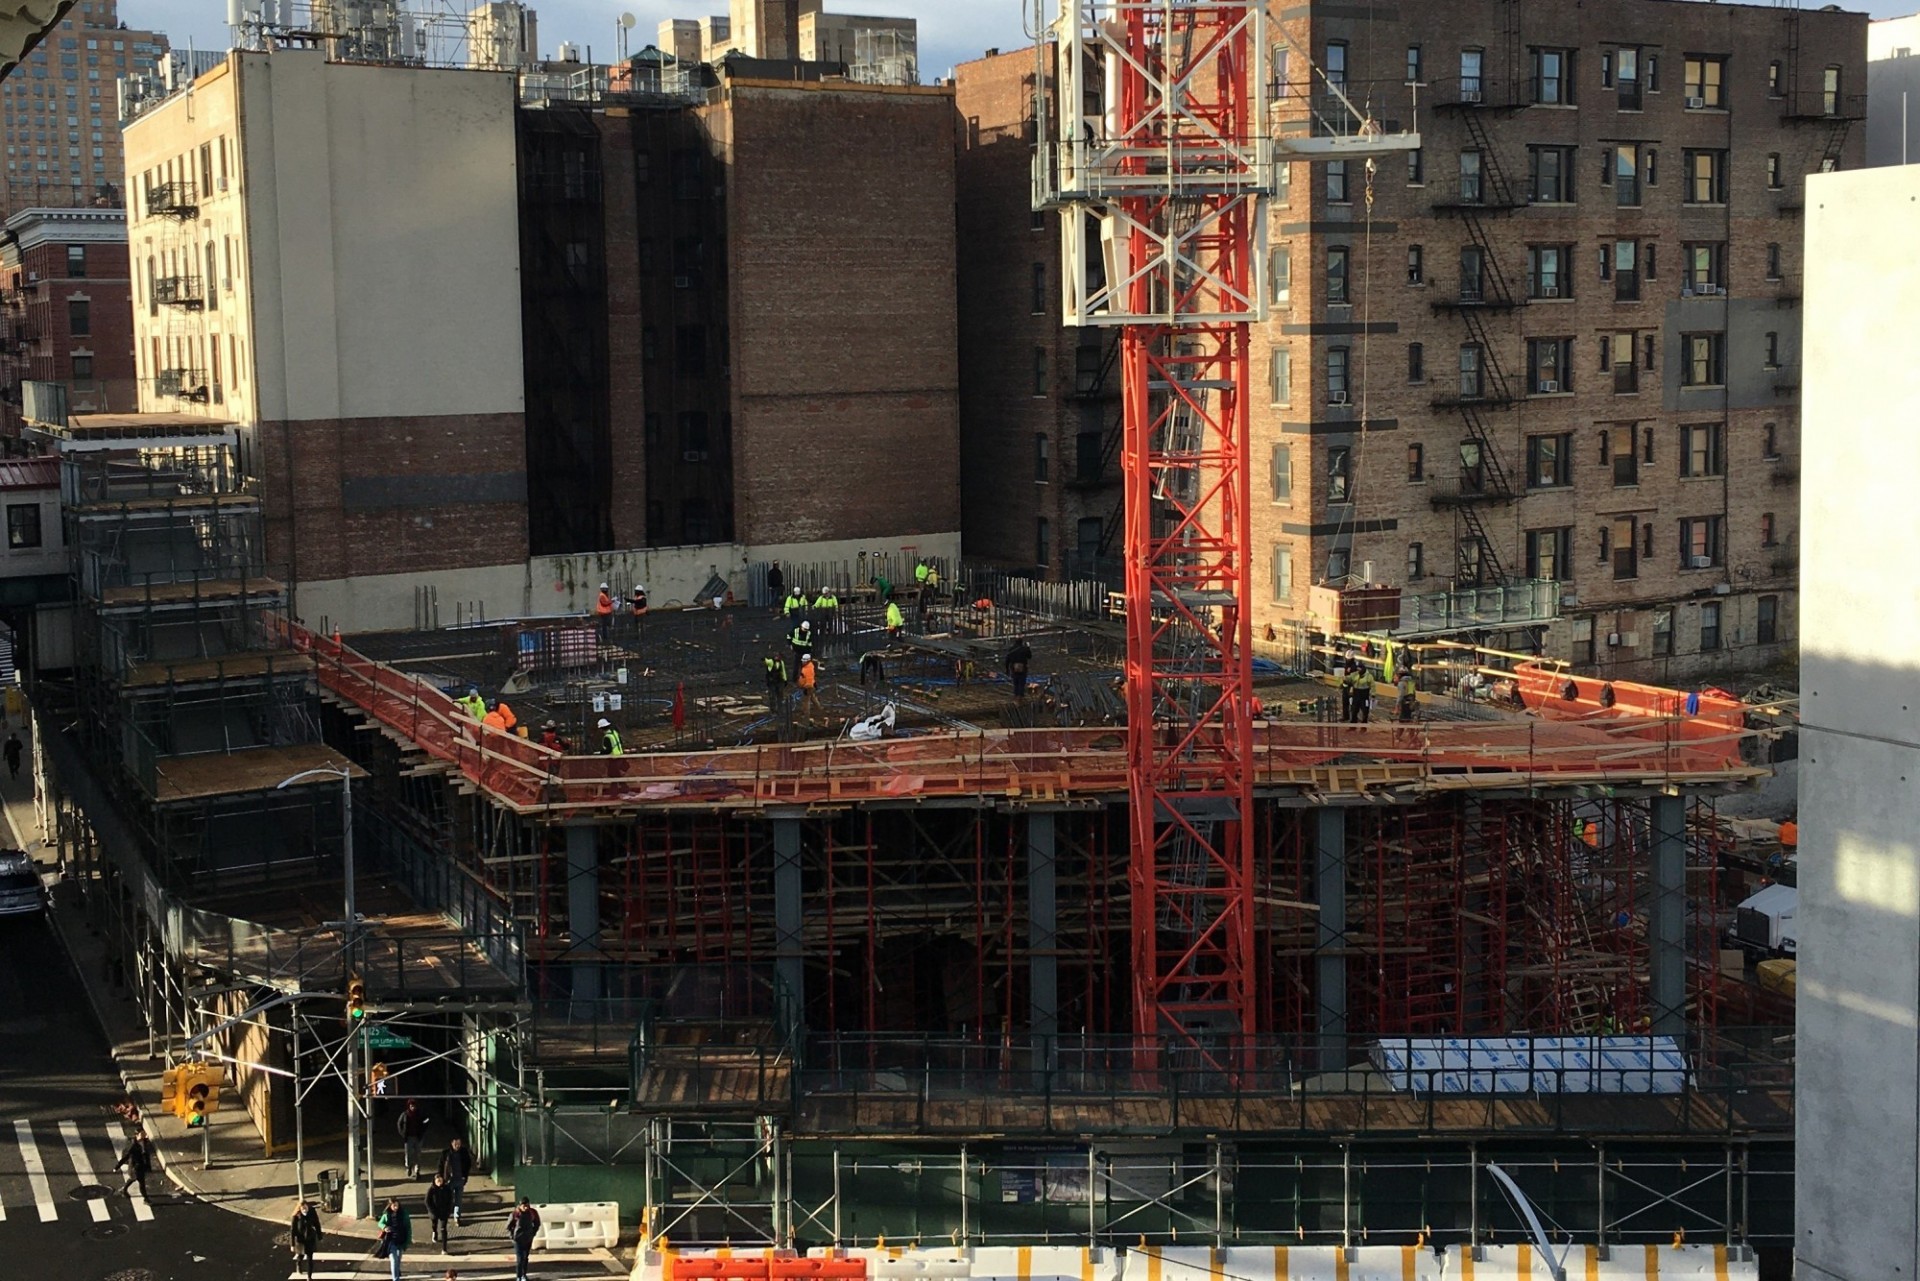 An aerial view of the 600 W. 125th Street construction site from the 125th Street subway station, with a large red crane on the site. 